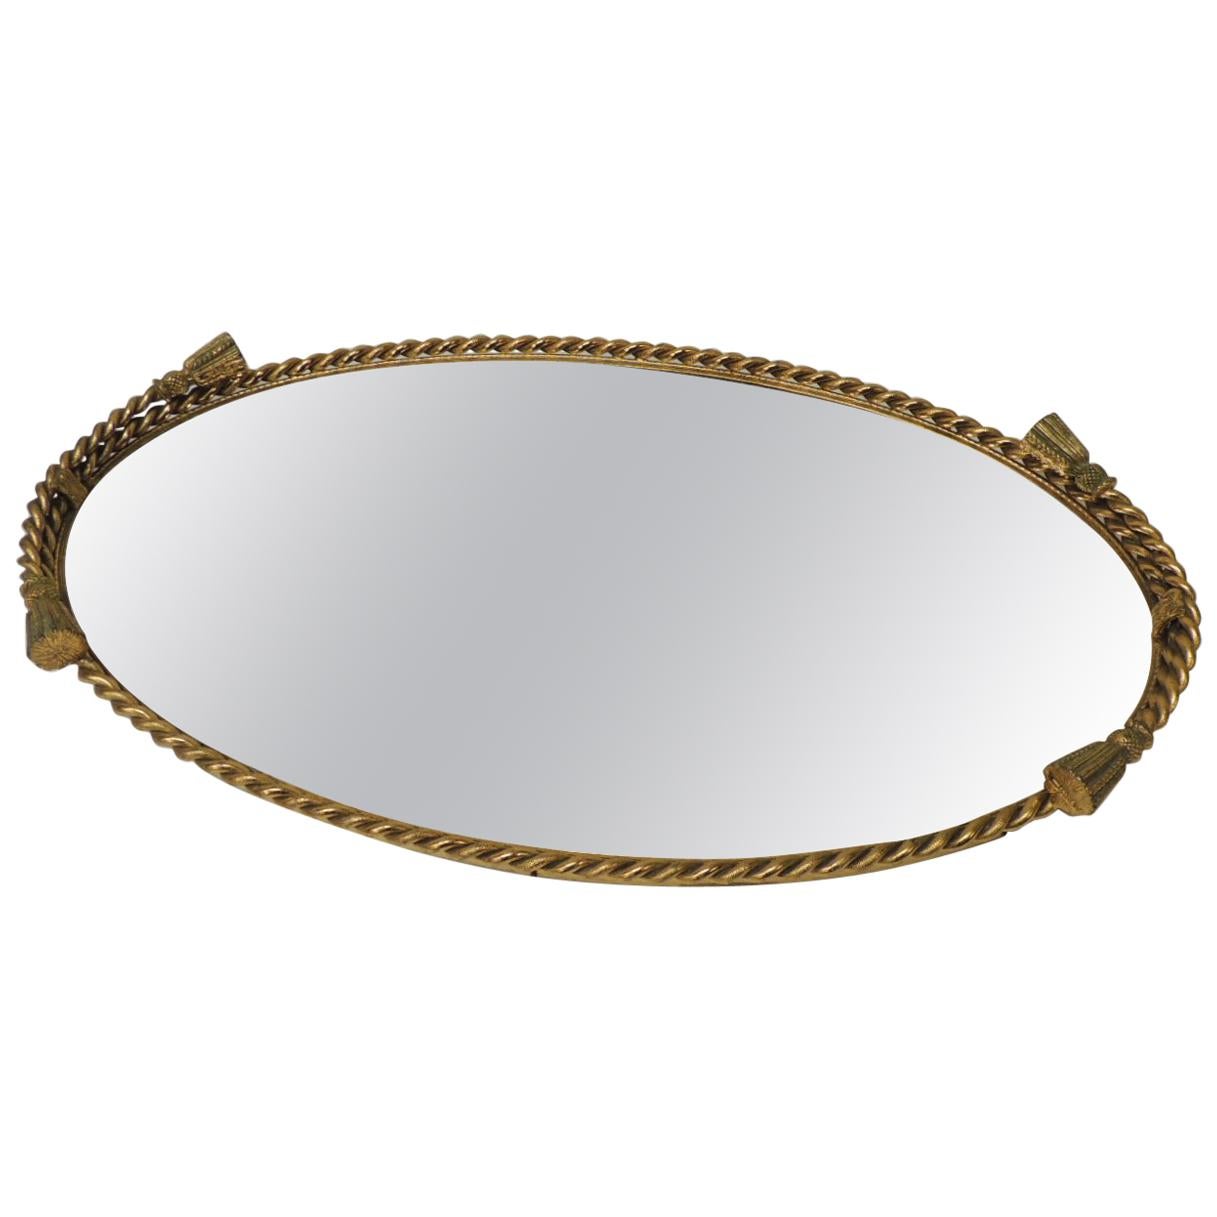 Vintage French Rope and Tassels Large Oval Brass Vanity Tray with Mirror